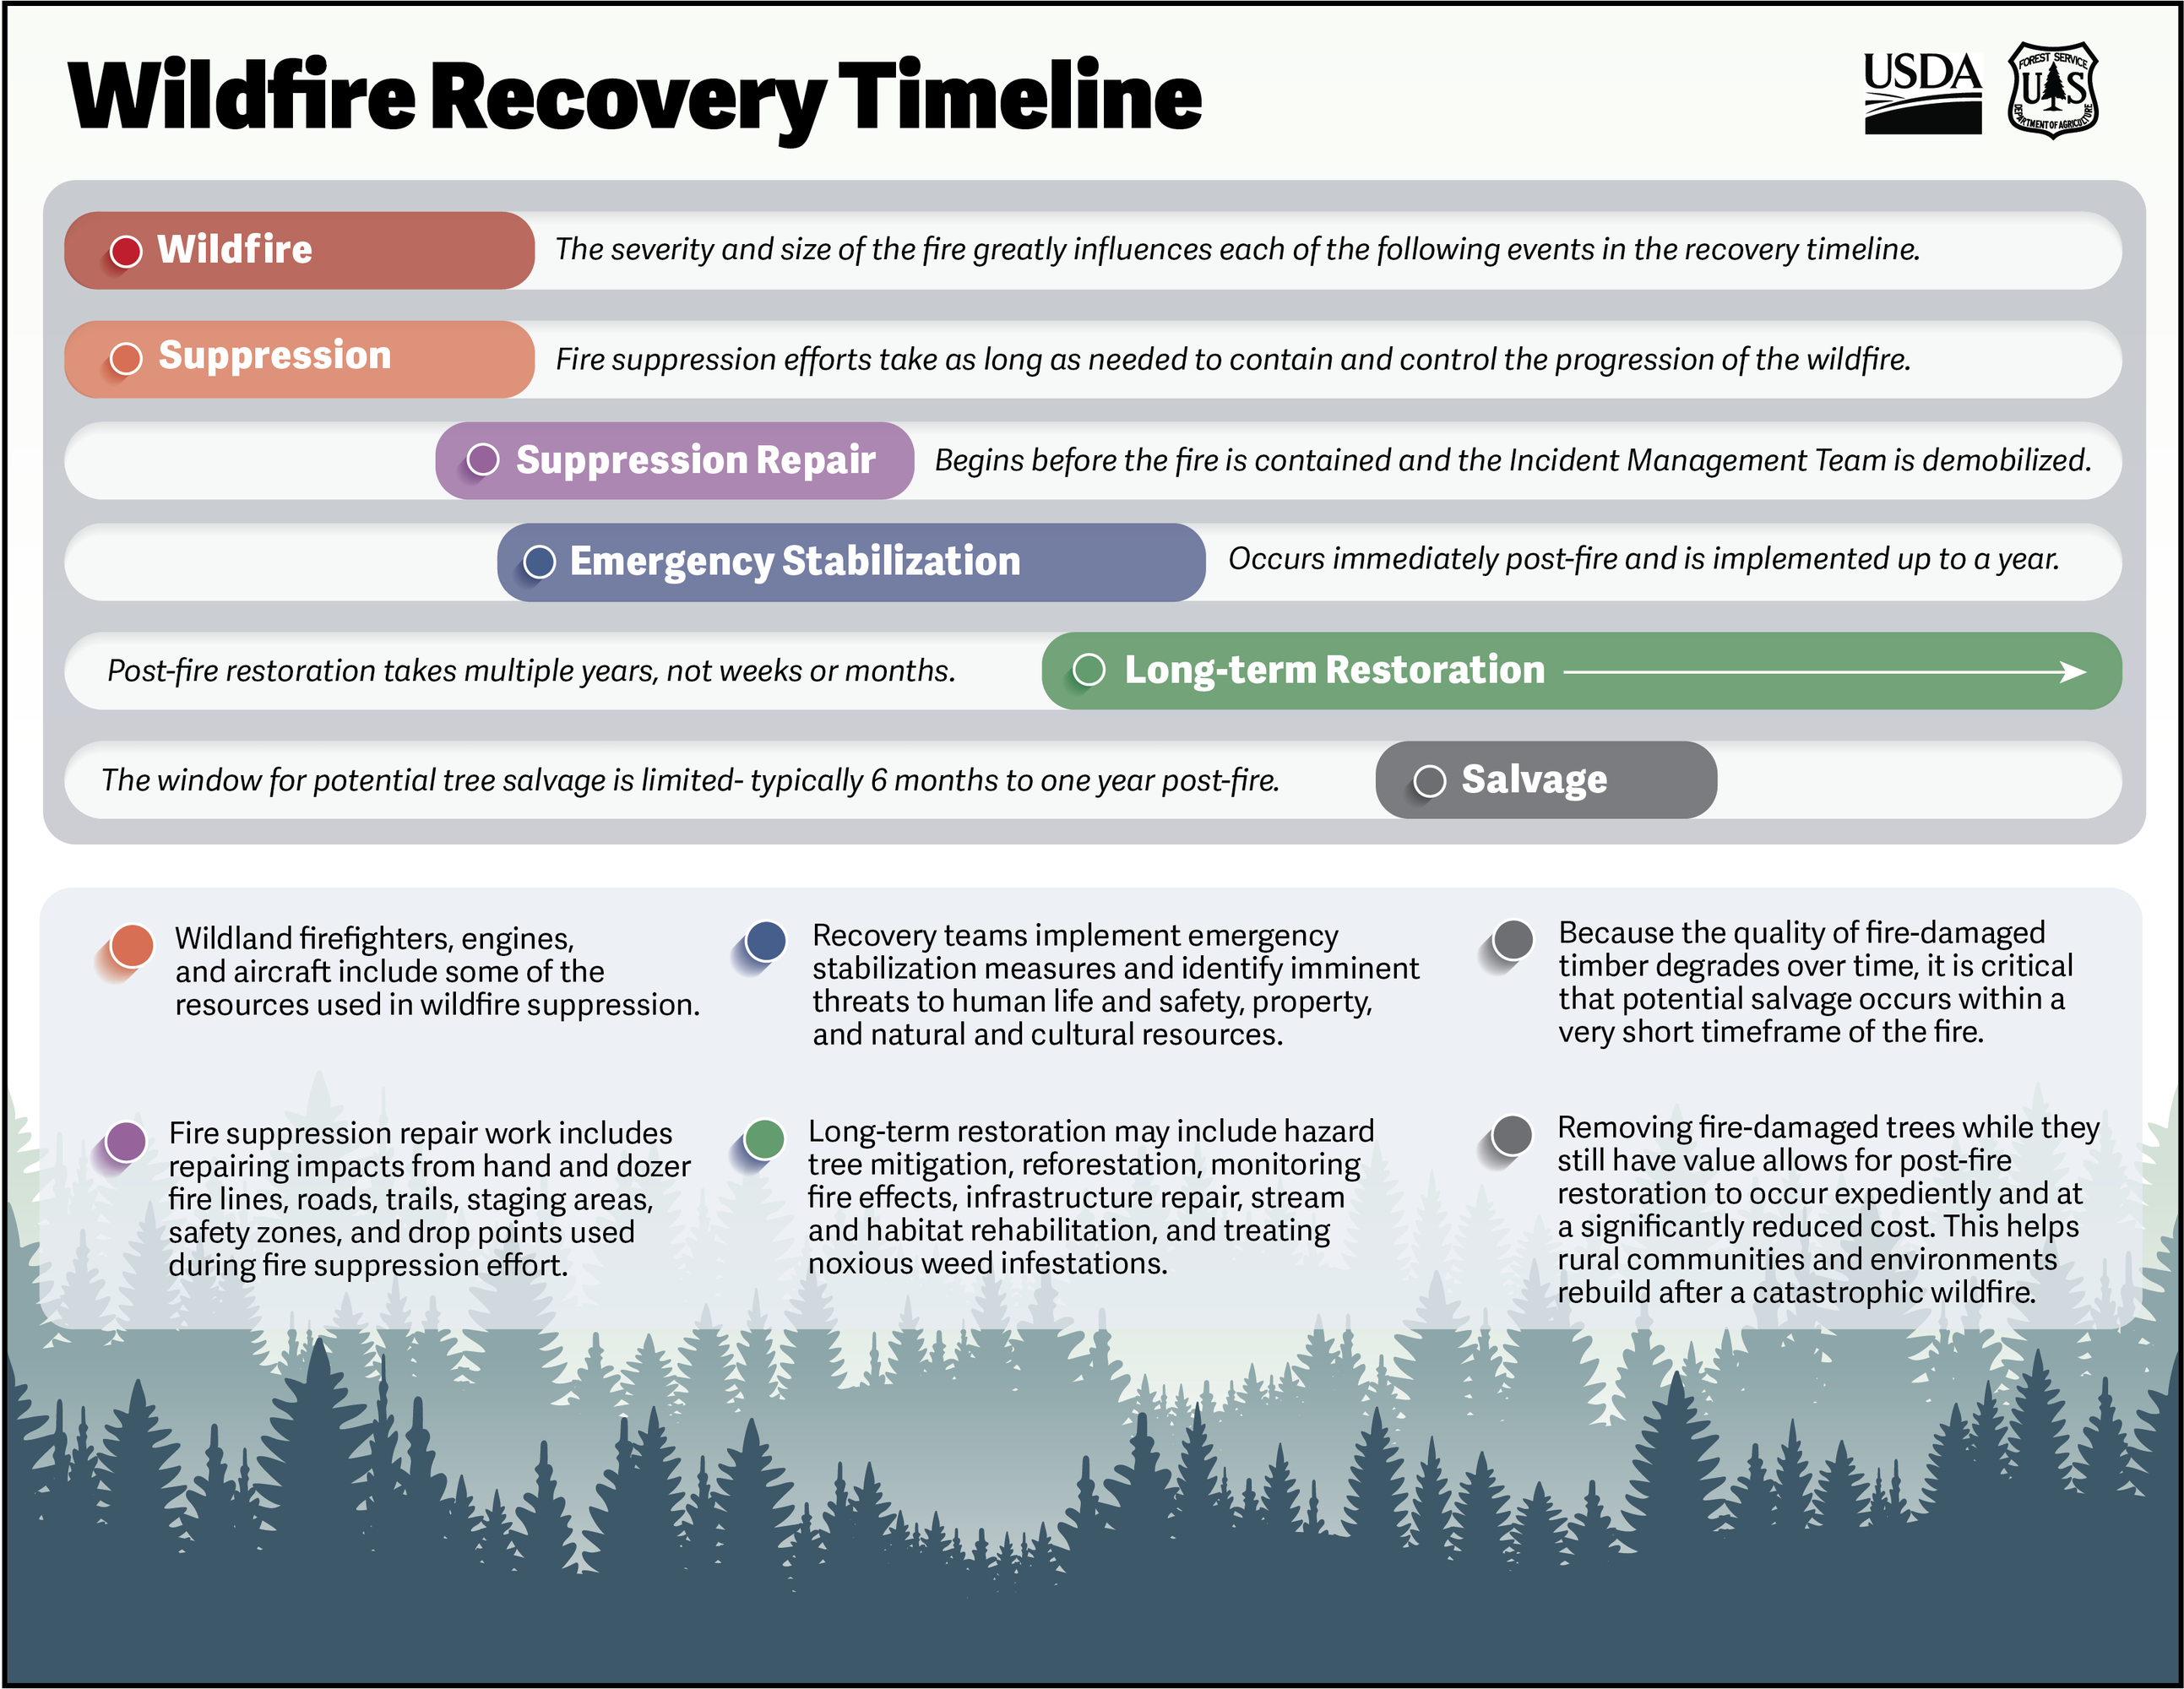 A graphic that shows a wildfire recovery timeline including long-term restoration